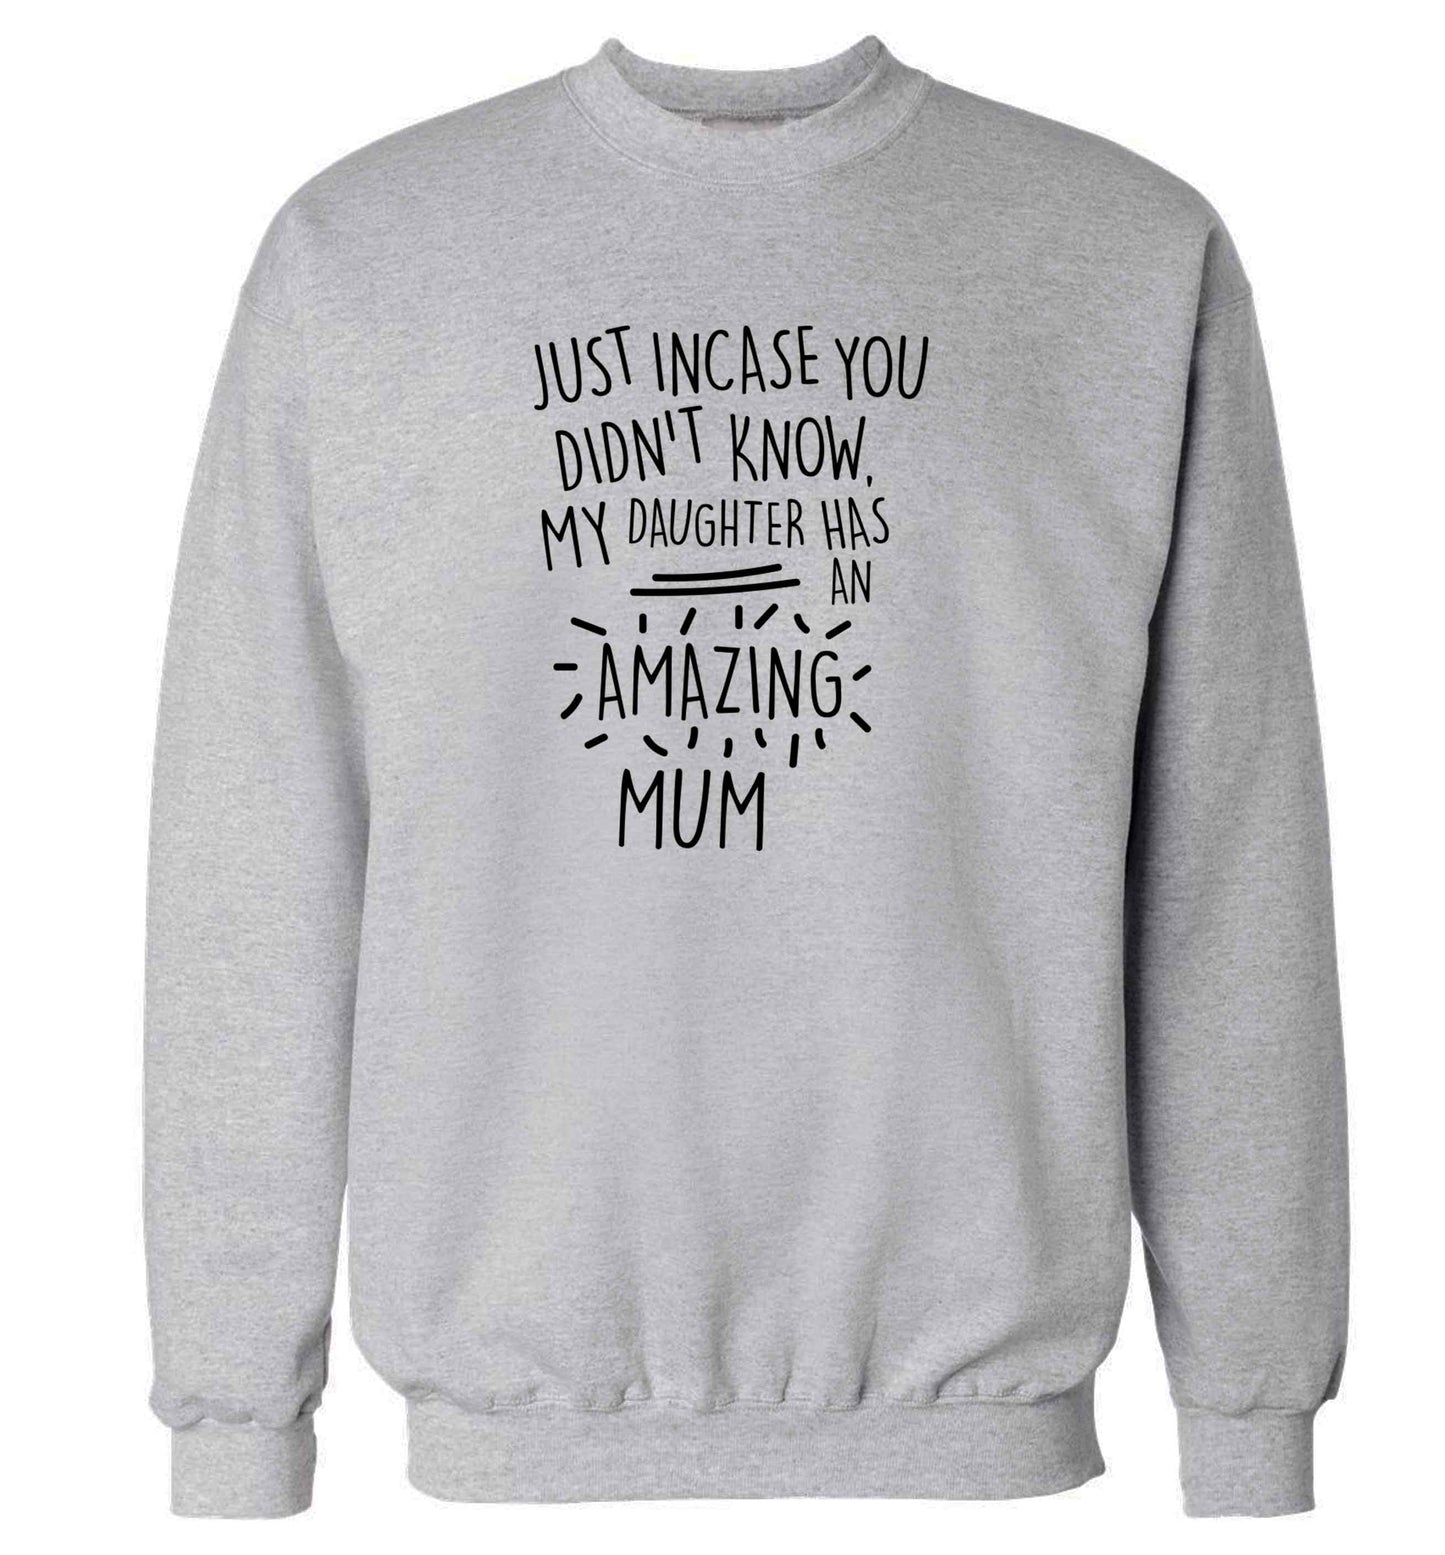 Just incase you didn't know my daughter has an amazing mum adult's unisex grey sweater 2XL